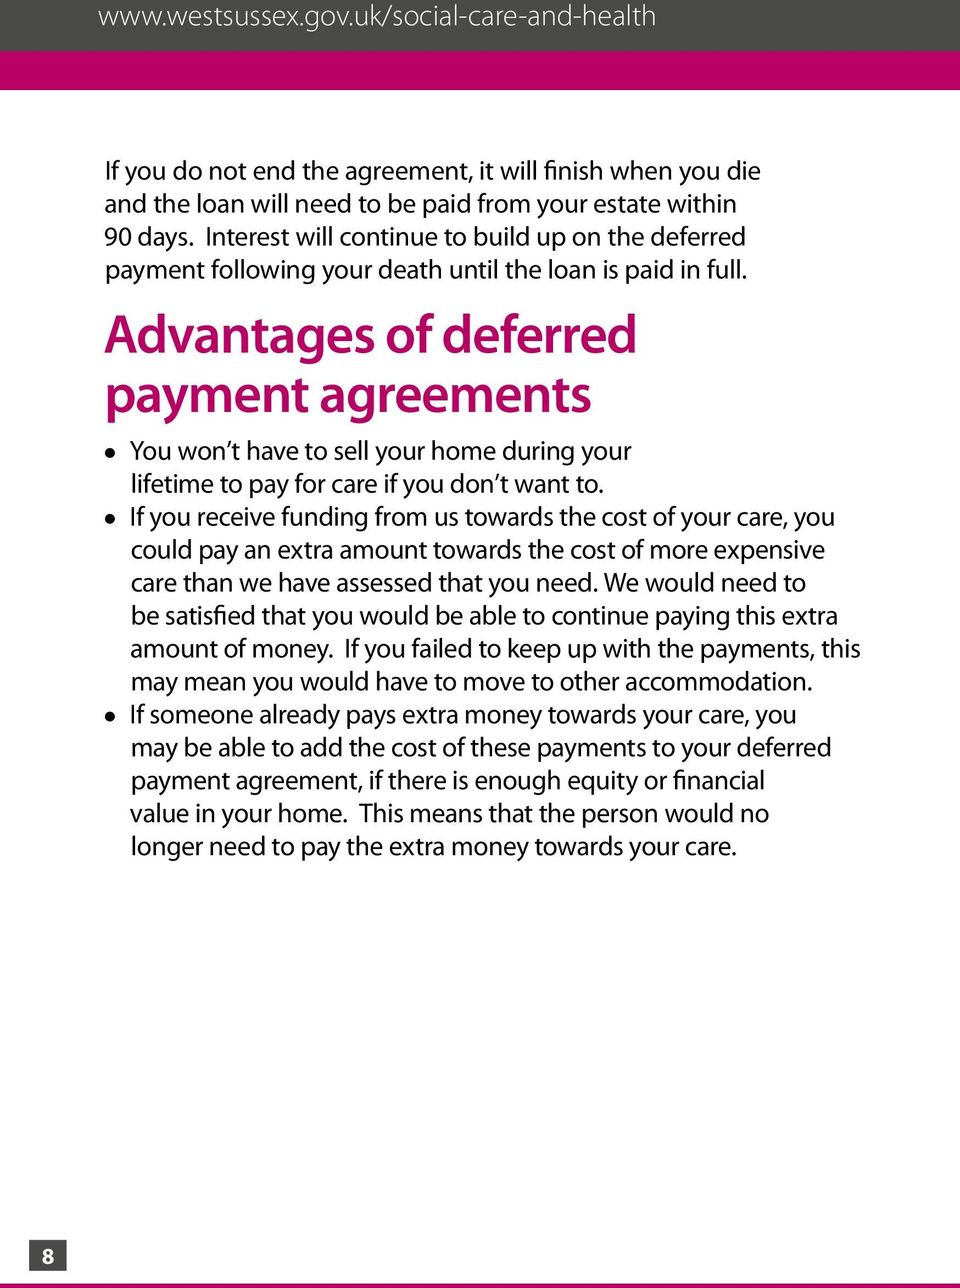 Advantages of deferred payment agreements l You won t have to sell your home during your lifetime to pay for care if you don t want to.